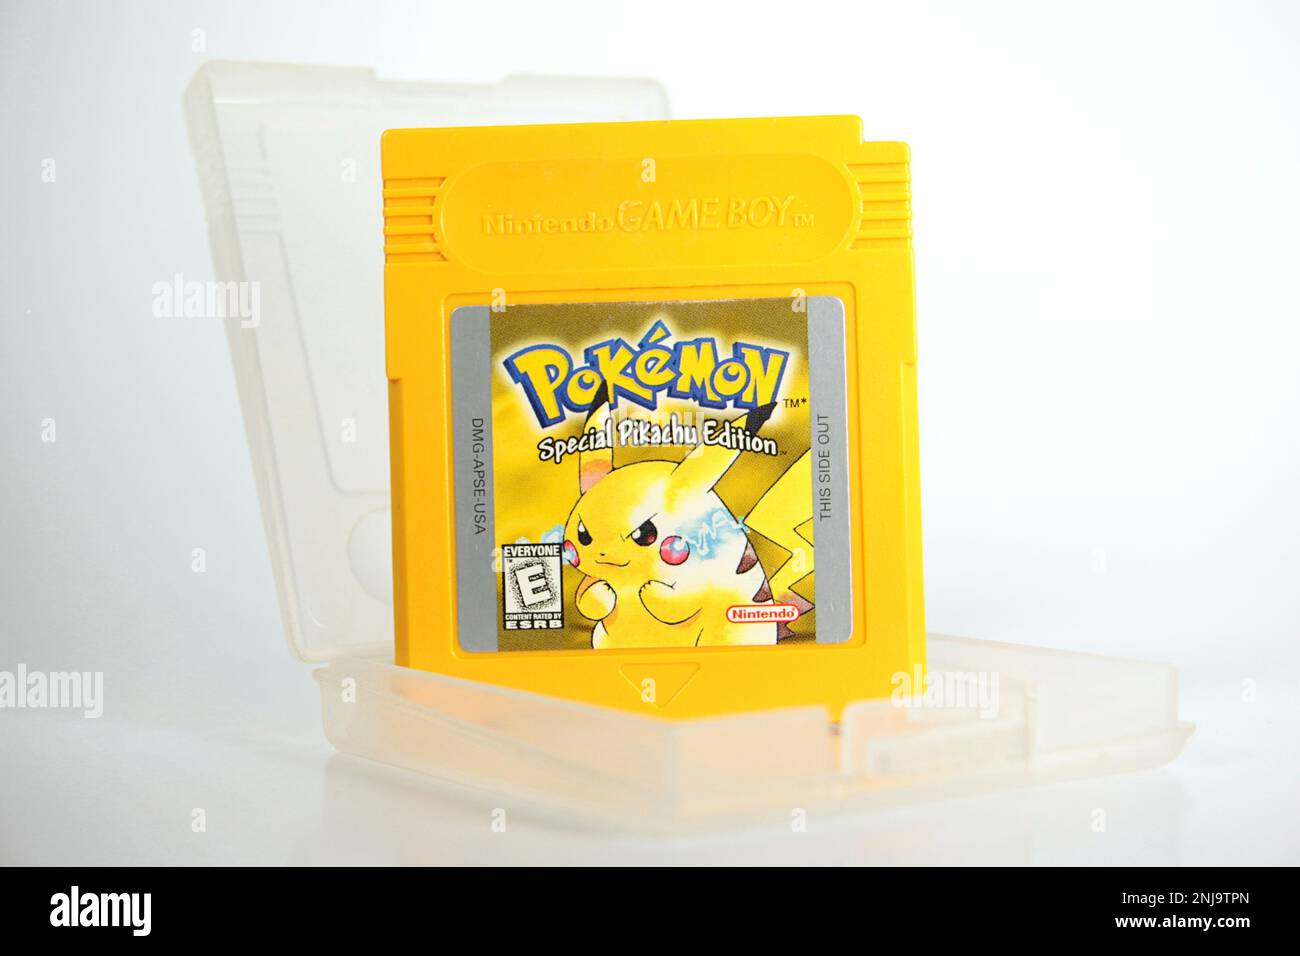 New York, NY - October 9, 2021: Close-up of classic Nintendo Gameboy game cartridge, Pokemon Yellow version with Pikachu character picture Stock Photo